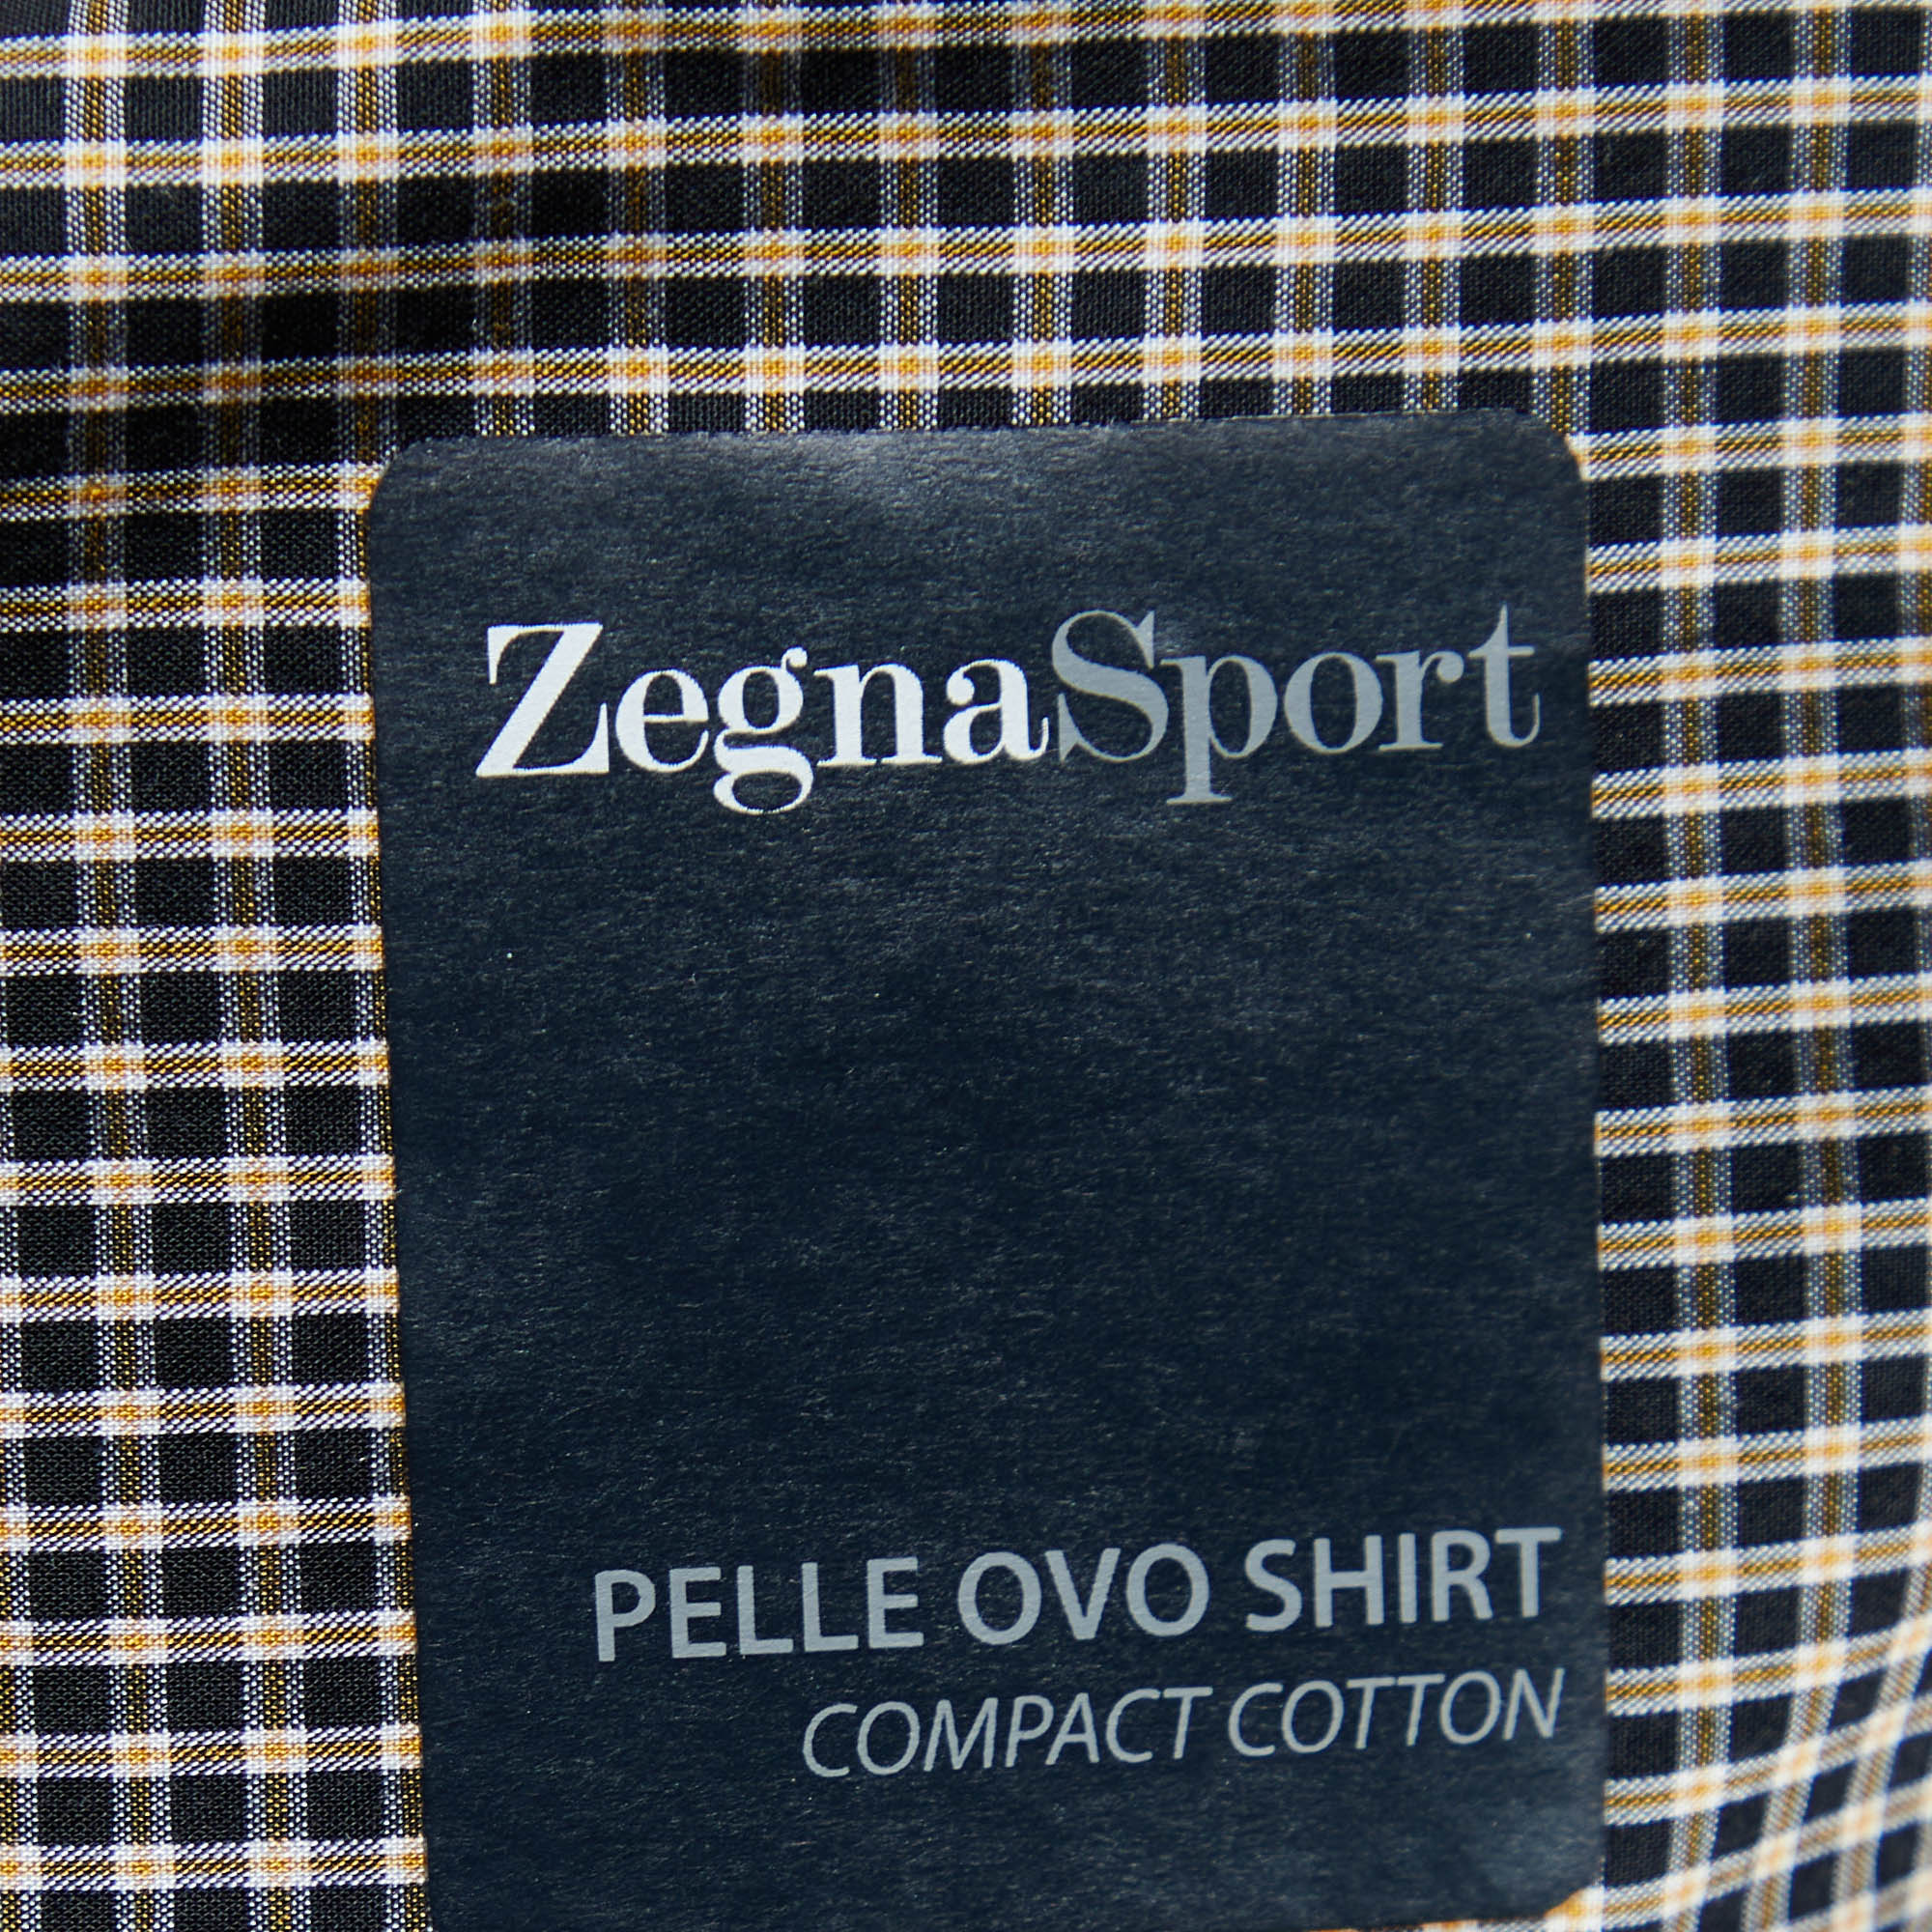 Zegna Sport Multicolor Checkered Cotton Tapered Fit Shirt XXL